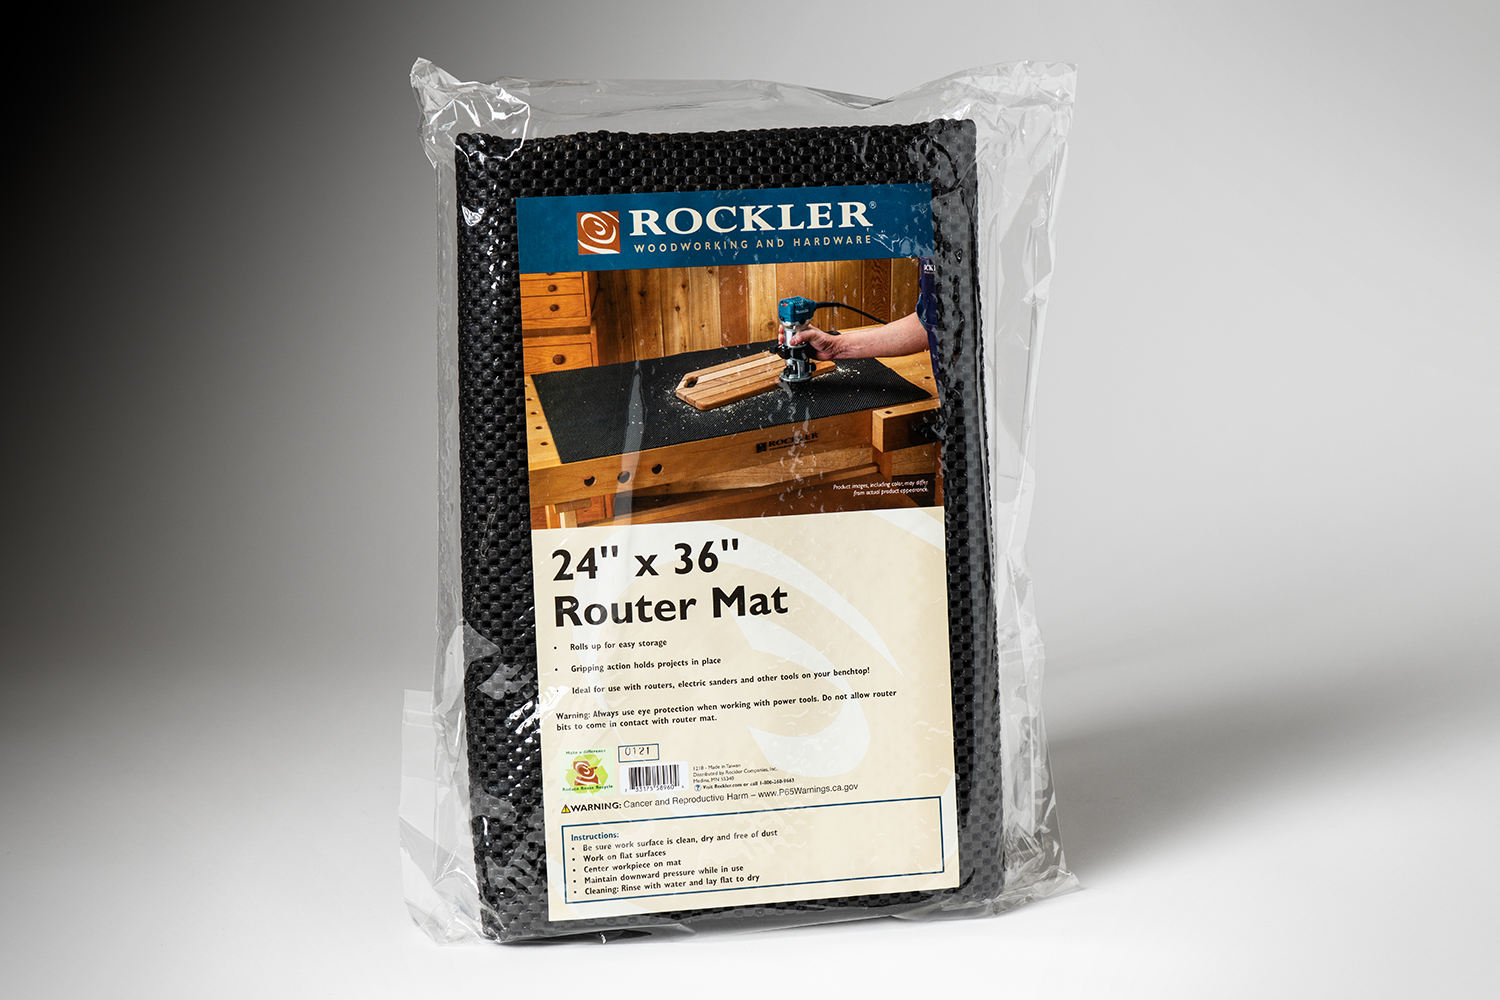 Non-Slip Router Mat, 2' x 3' Rockler Woodworking and Hardware